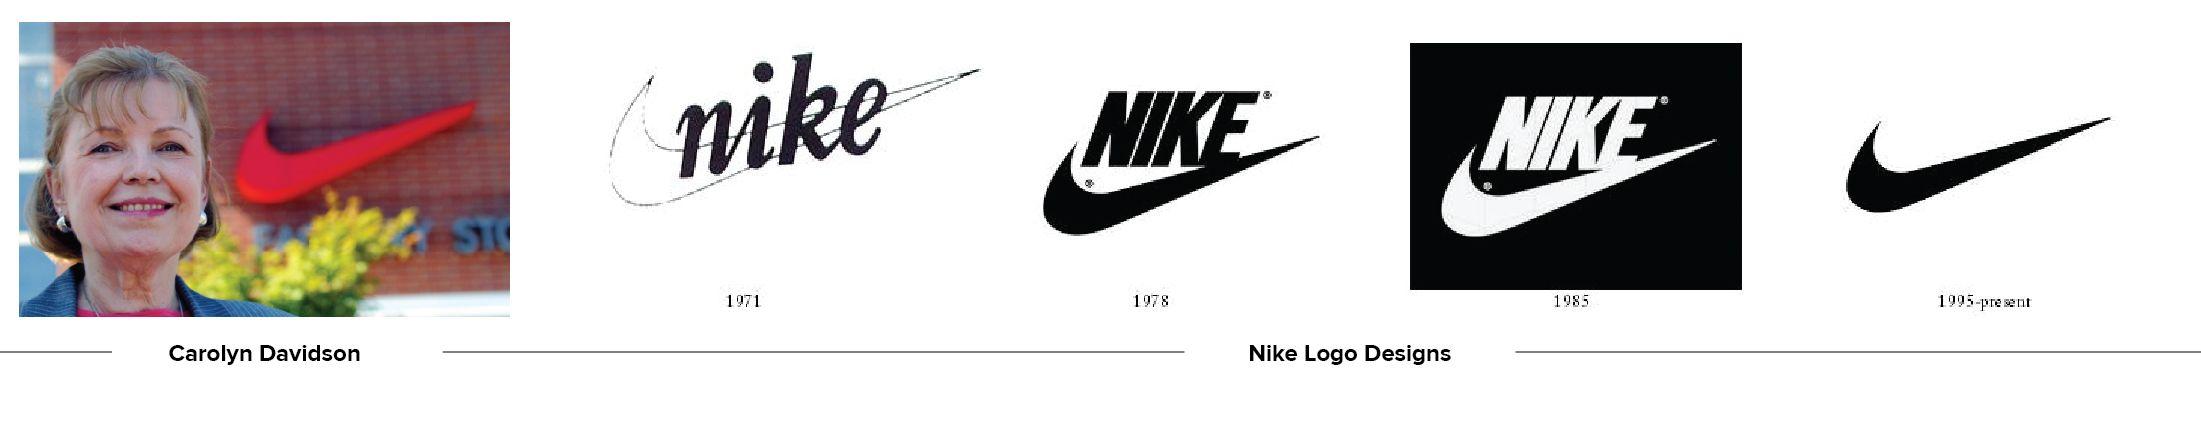 The Nike Logo - History of the Nike Swoosh | Logo Design by Tailor Brands